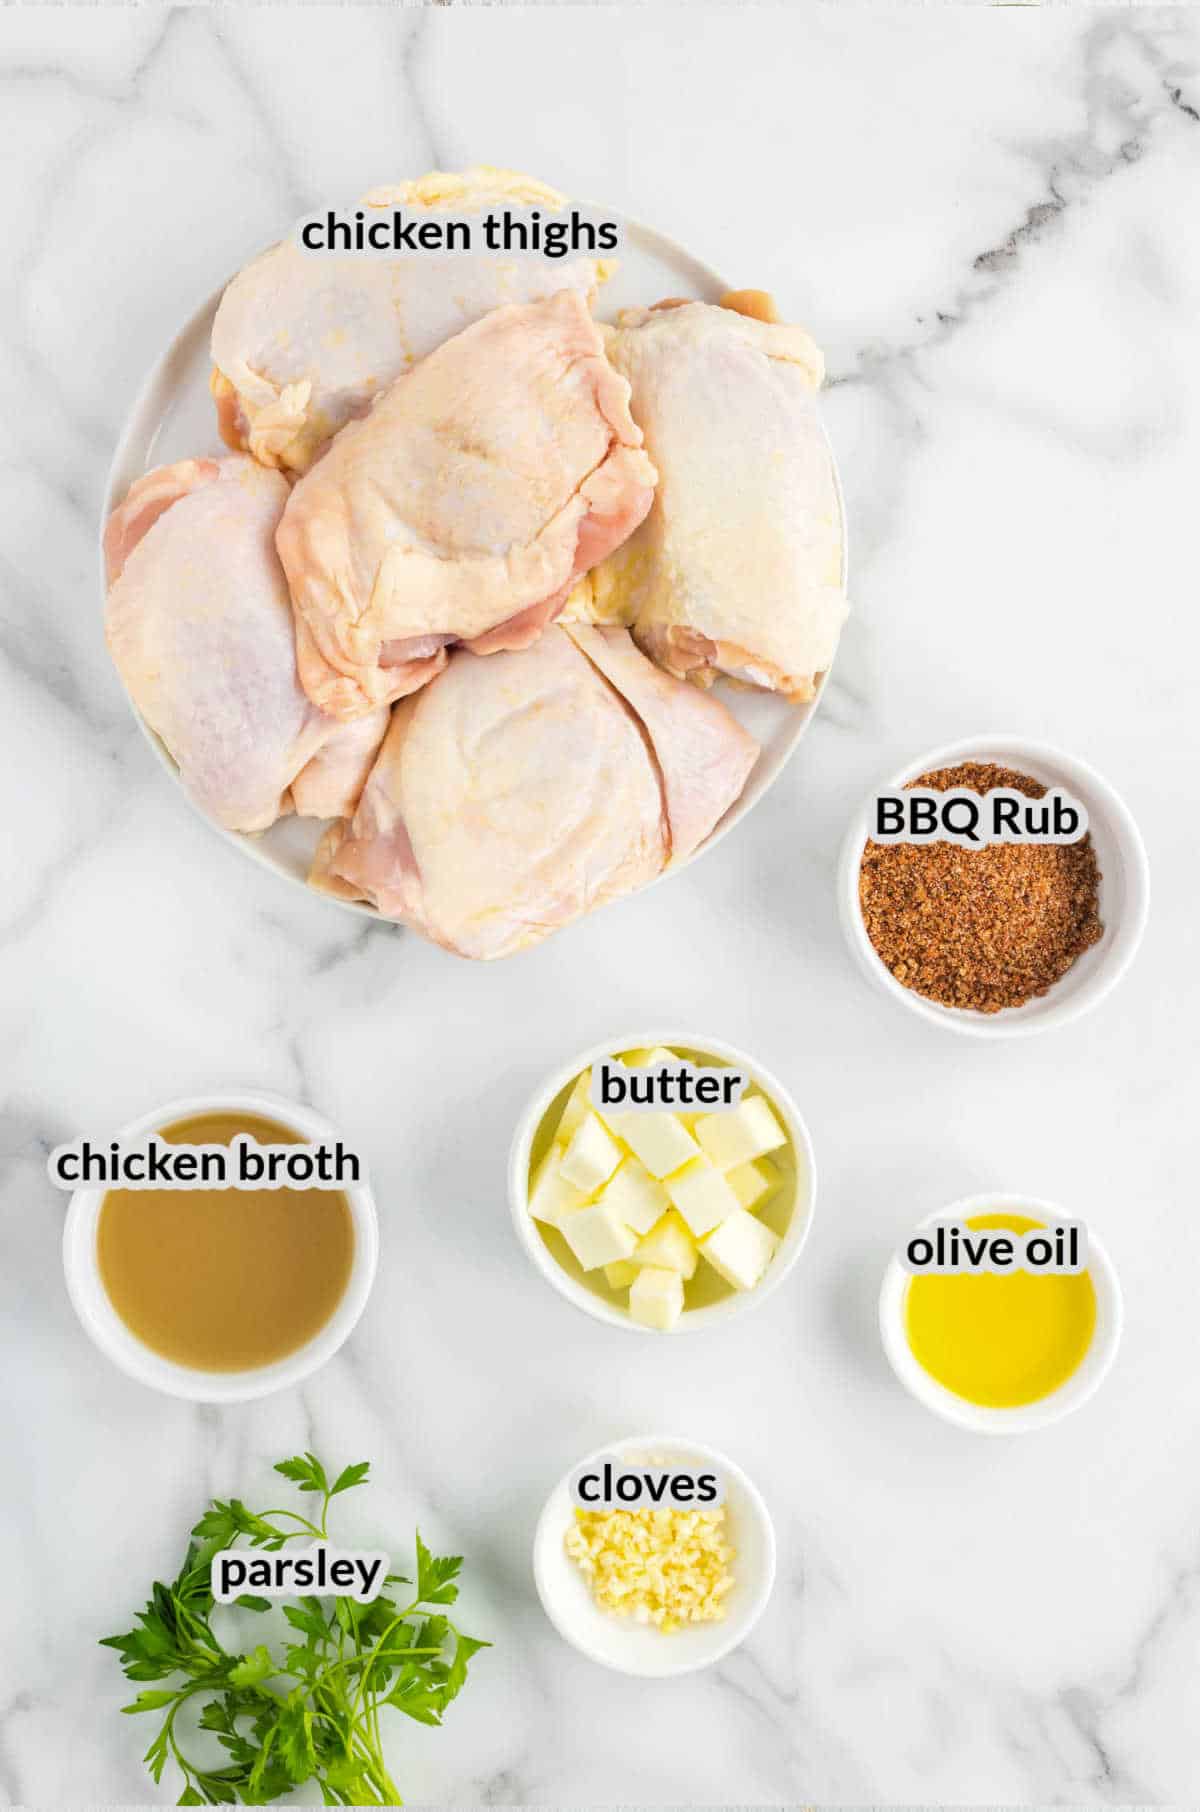 Oerhead Image of Slow Cooker Chicken Thighs Ingredients